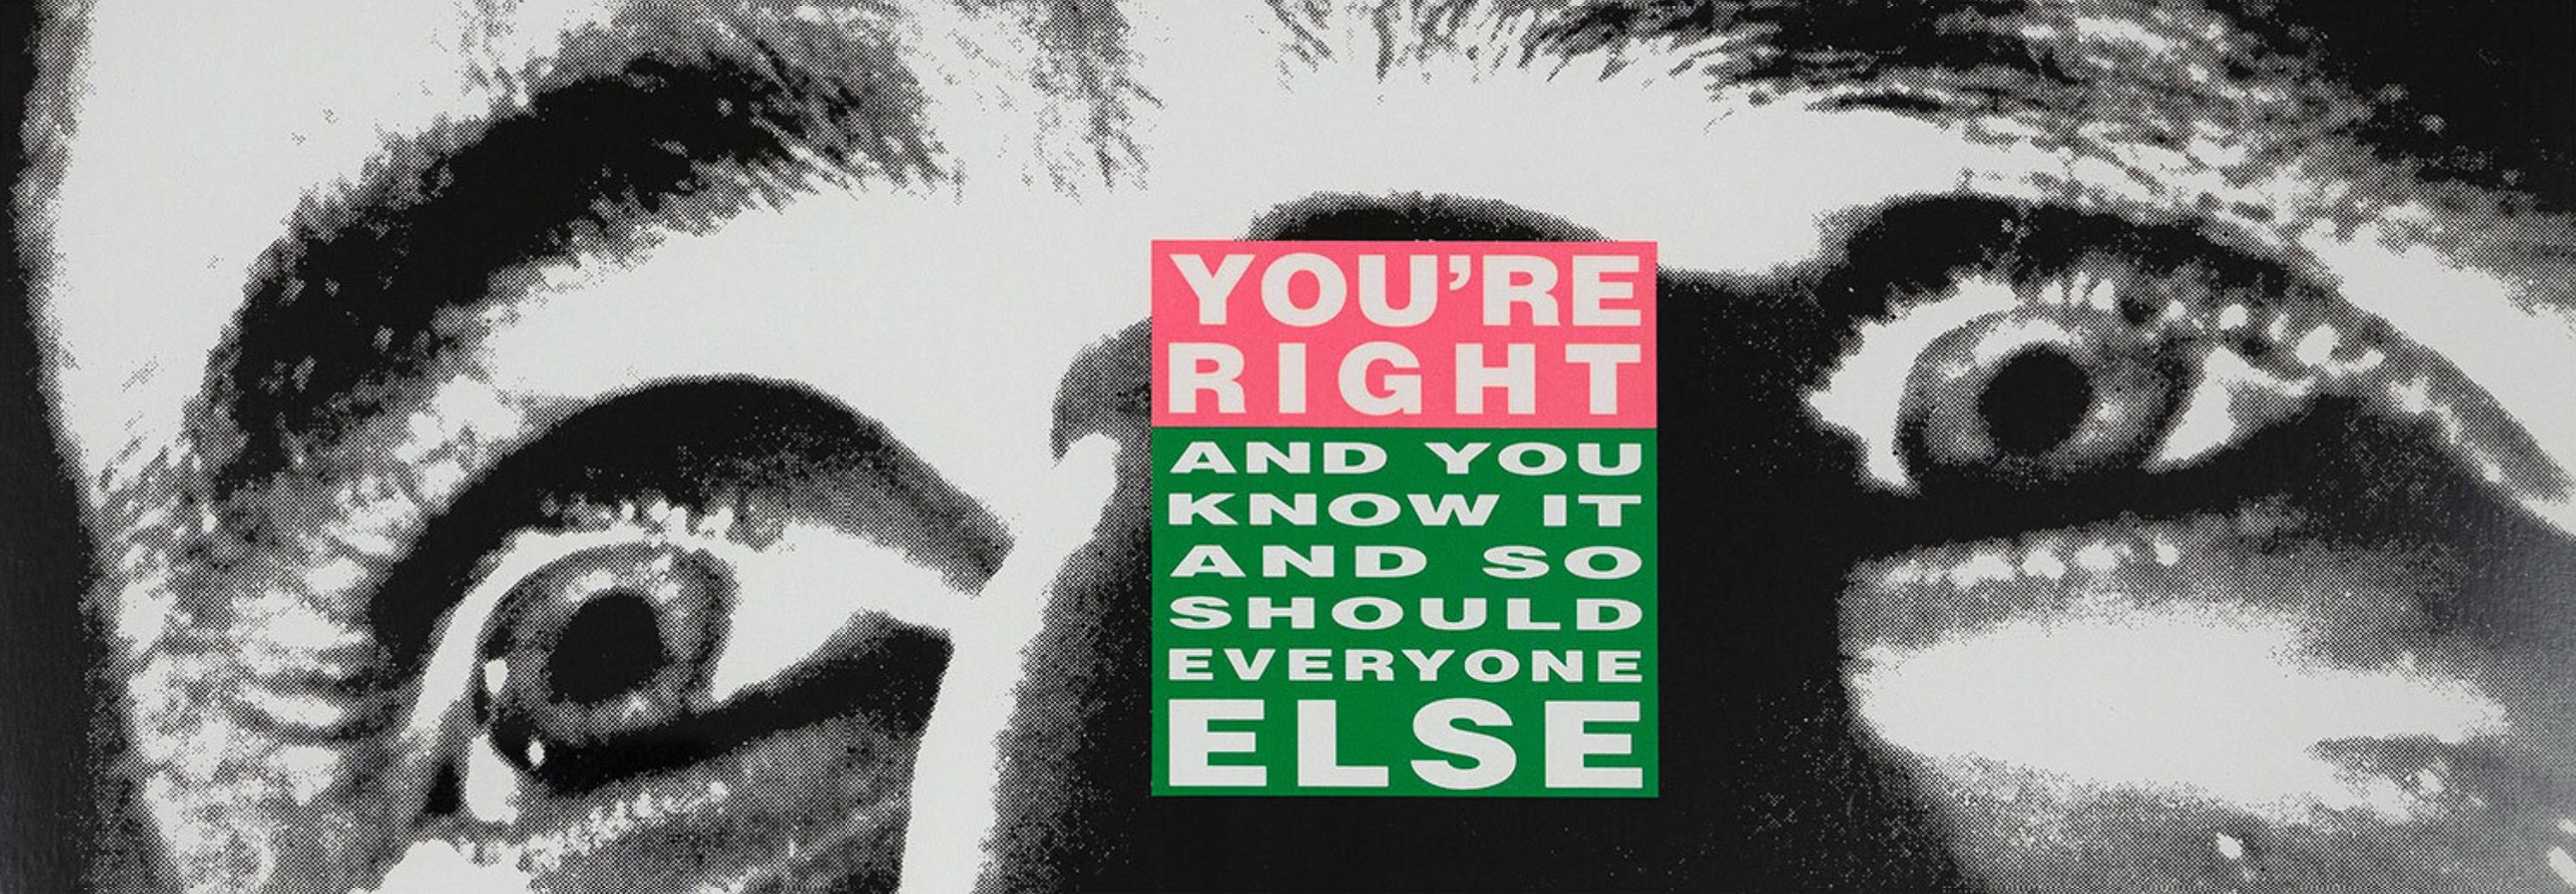 You're Right and You Know It (And So Should Everyone Else) - Mixed Media Art by Barbara Kruger